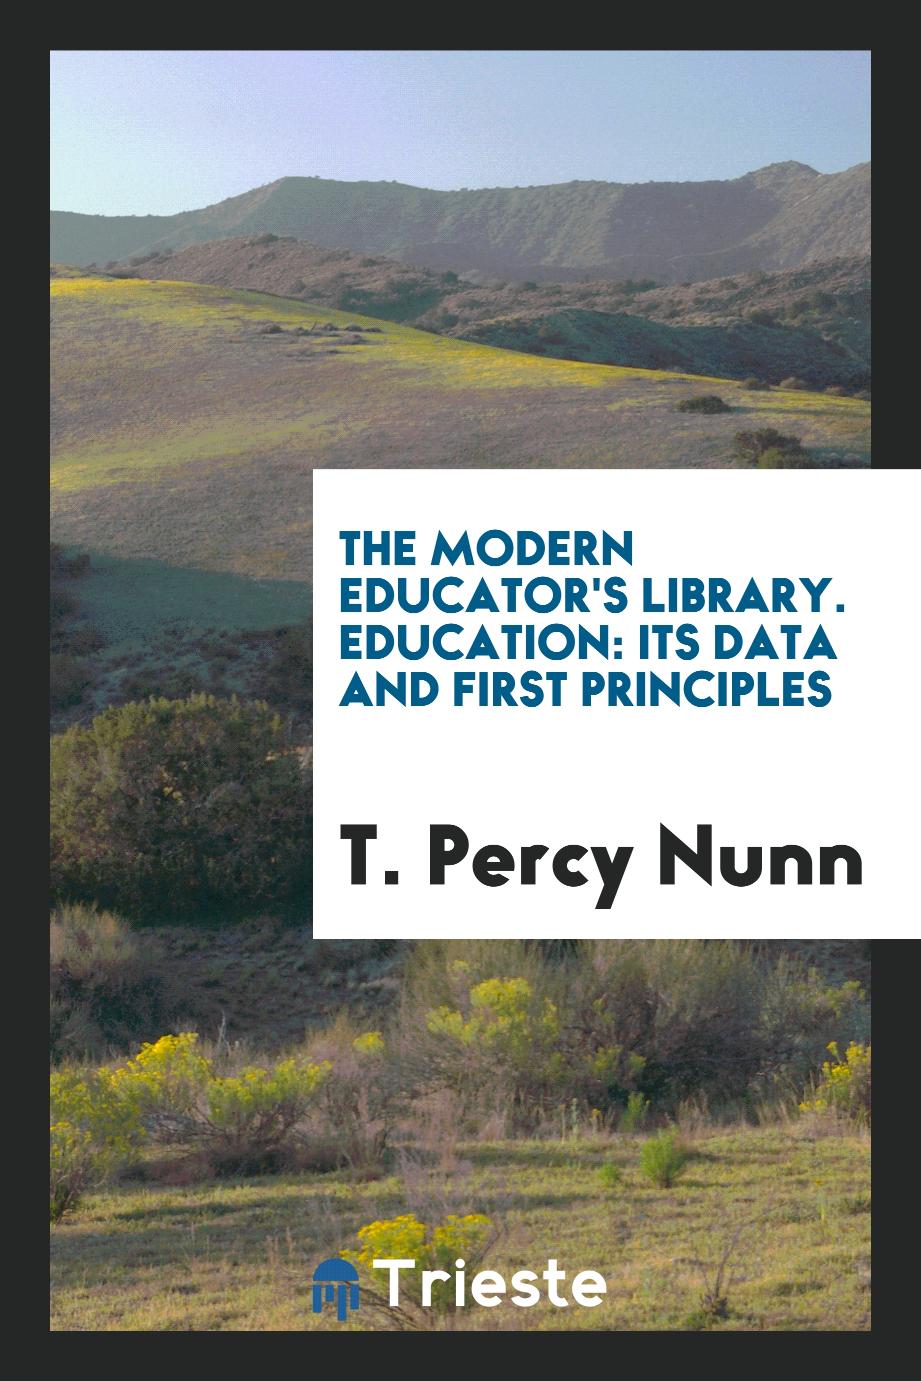 The modern educator's library. Education: its data and first principles